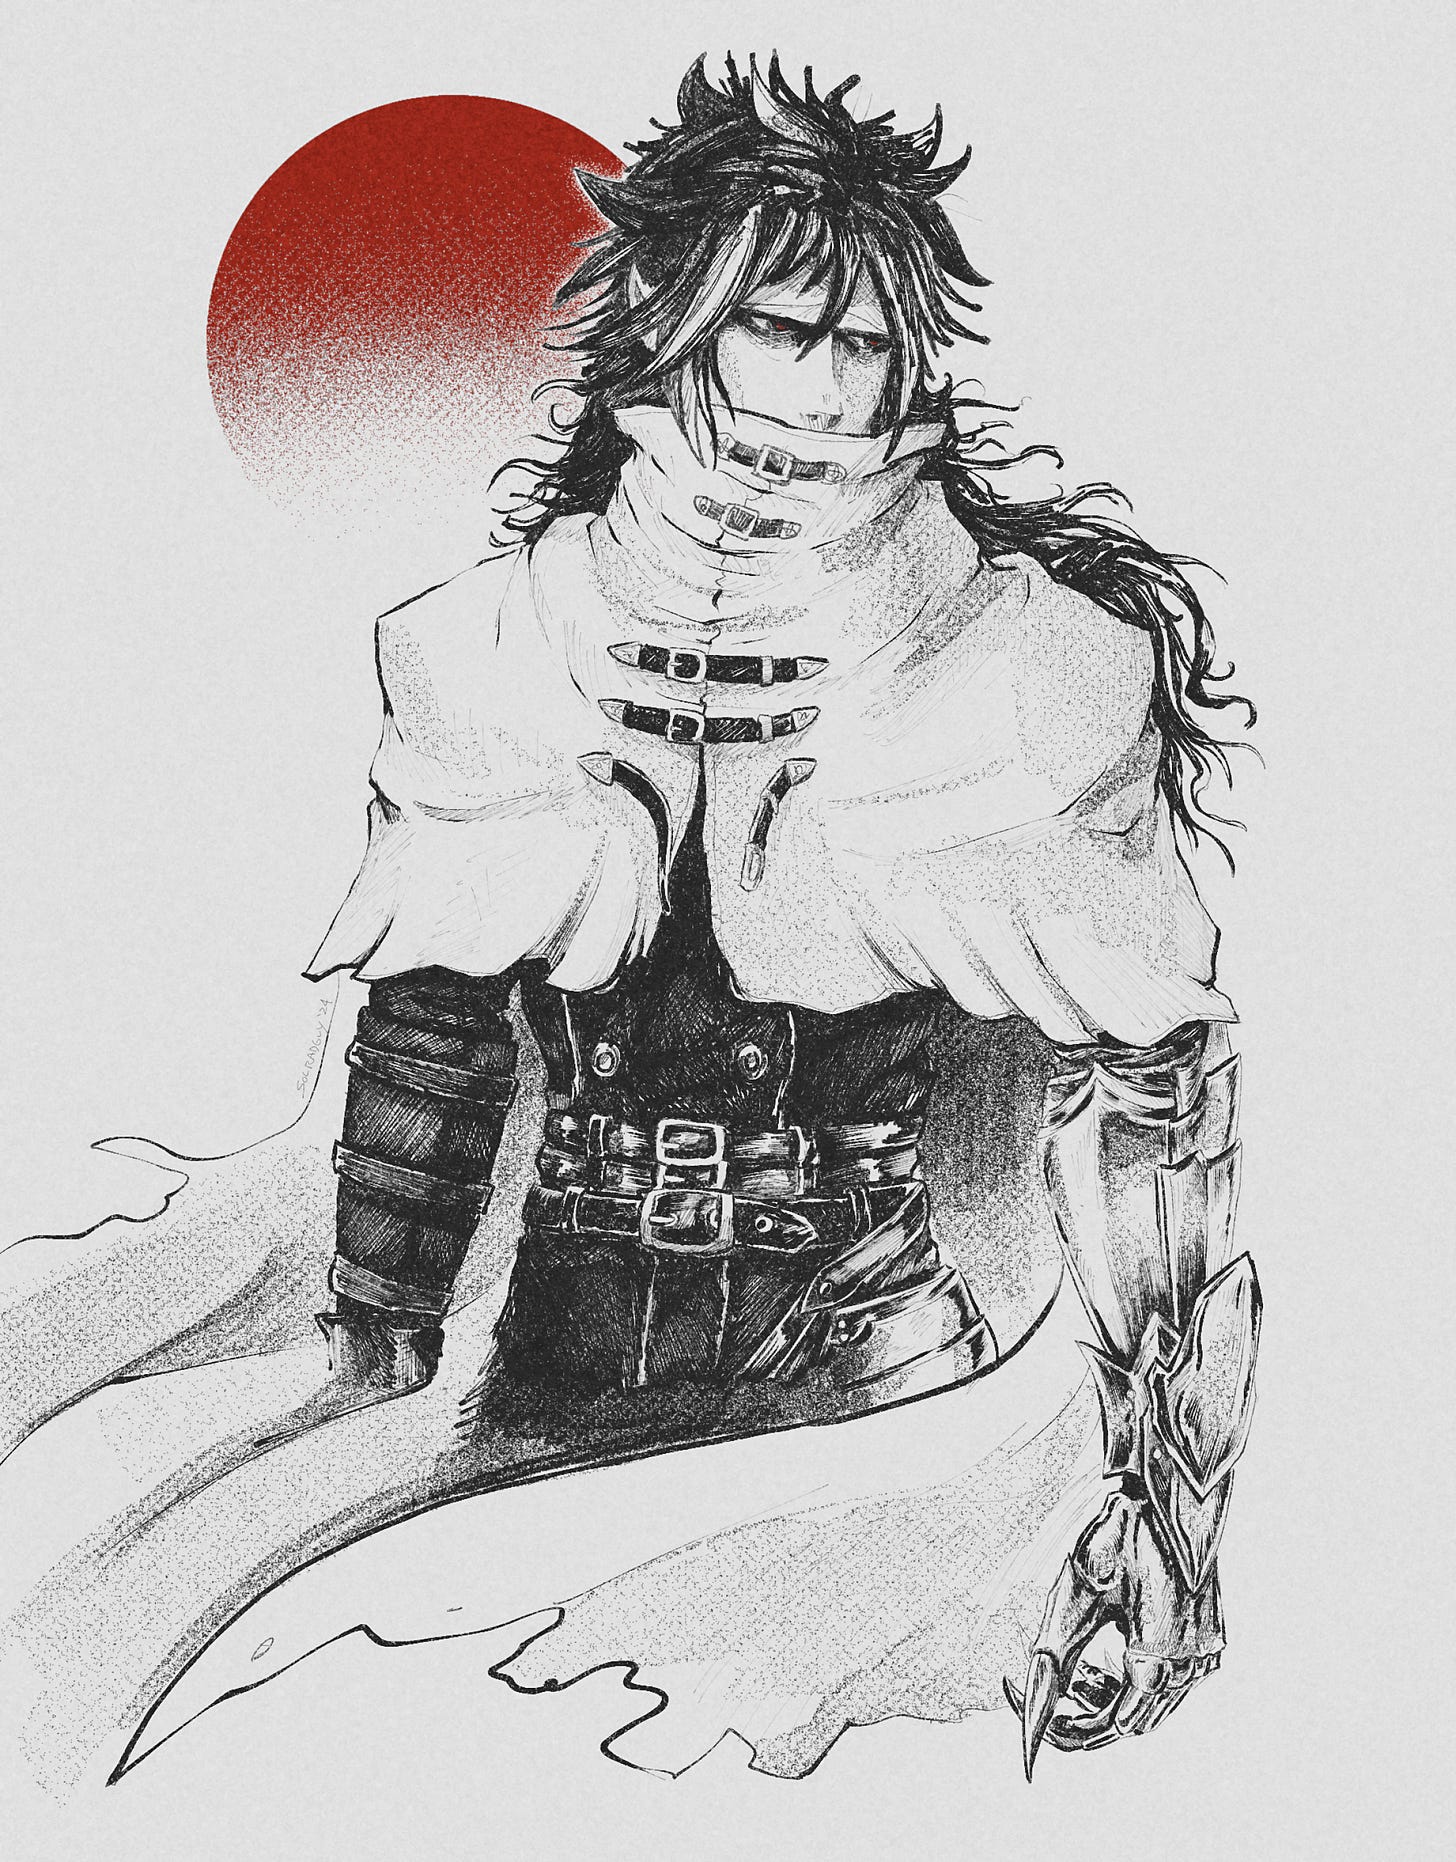 Vincent Valentine from Final Fantasy VII Rebirth. The style greyscale with heavy inks and texture. A red sun forms out of the mist just behind his head. His expression is pensive.